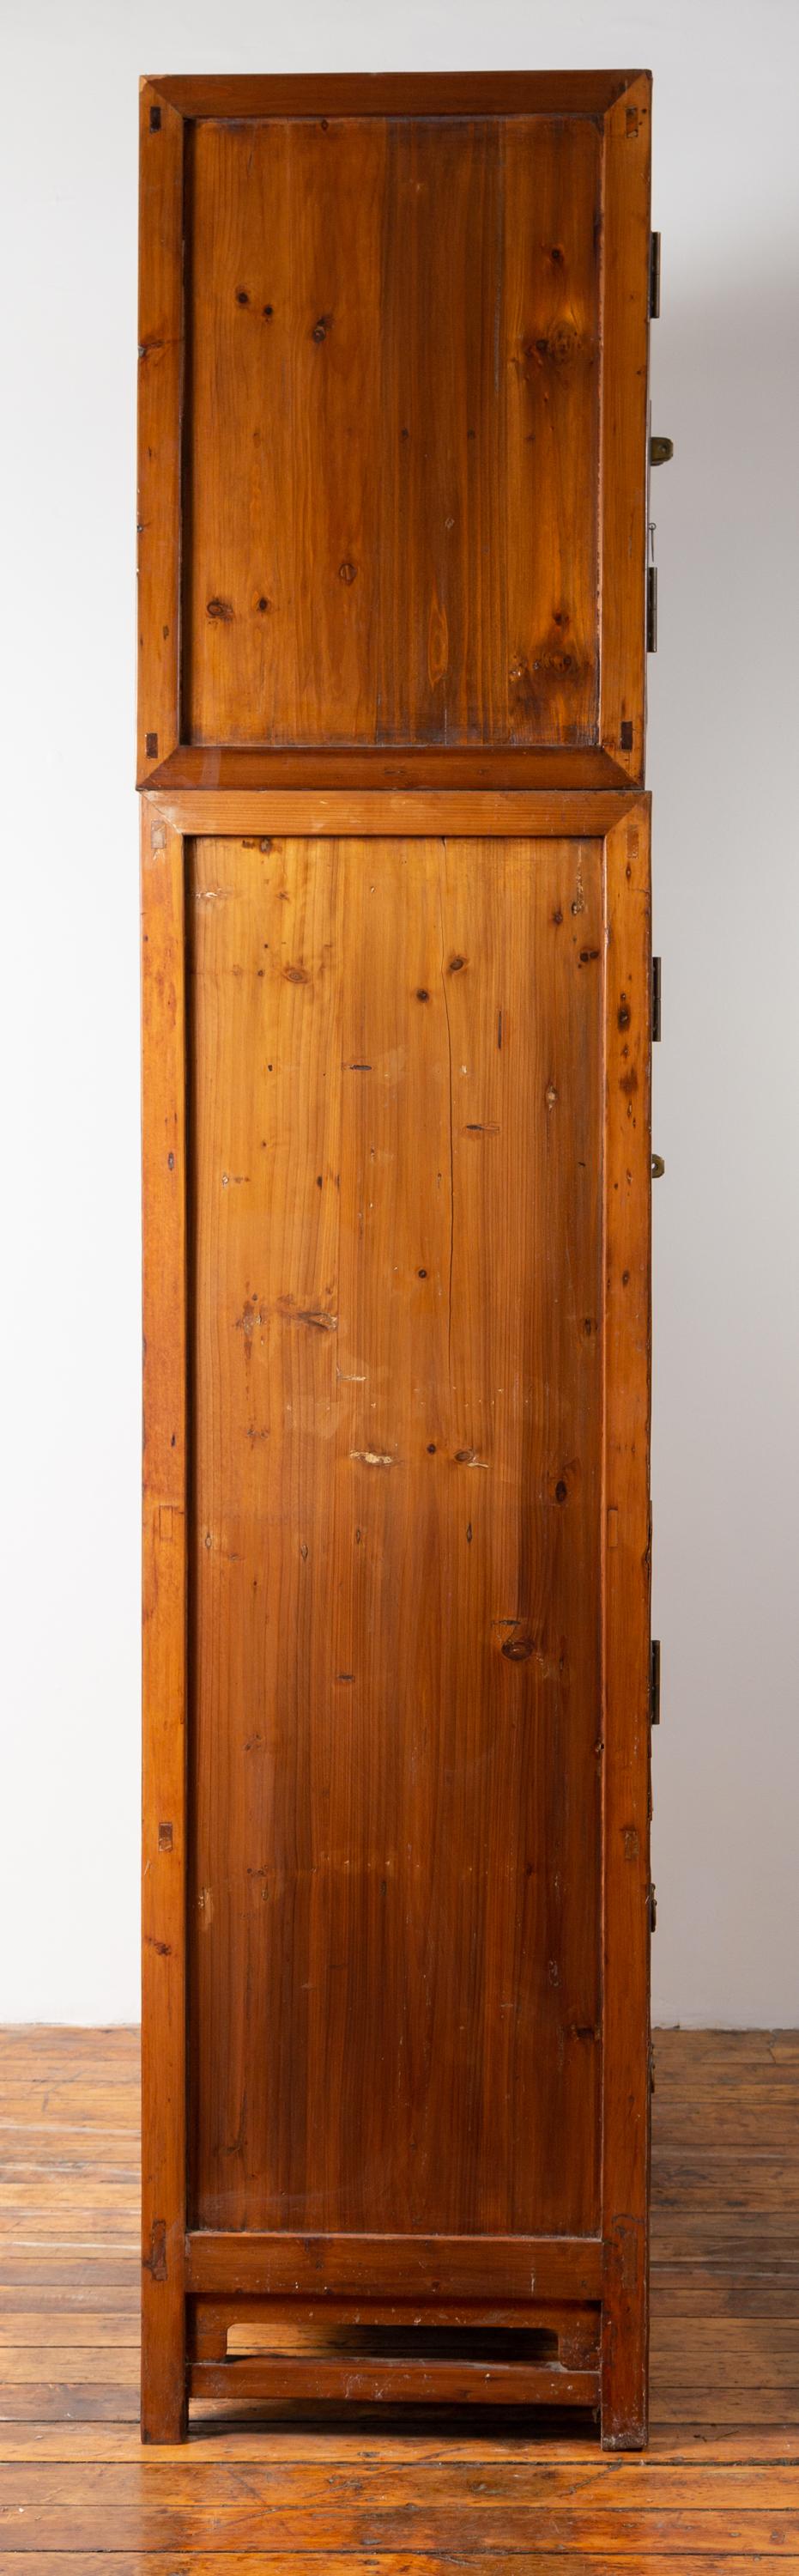 20th Century Vintage Elm Wood Compound Two-Part Wedding Wardrobe with Doors and Drawers For Sale